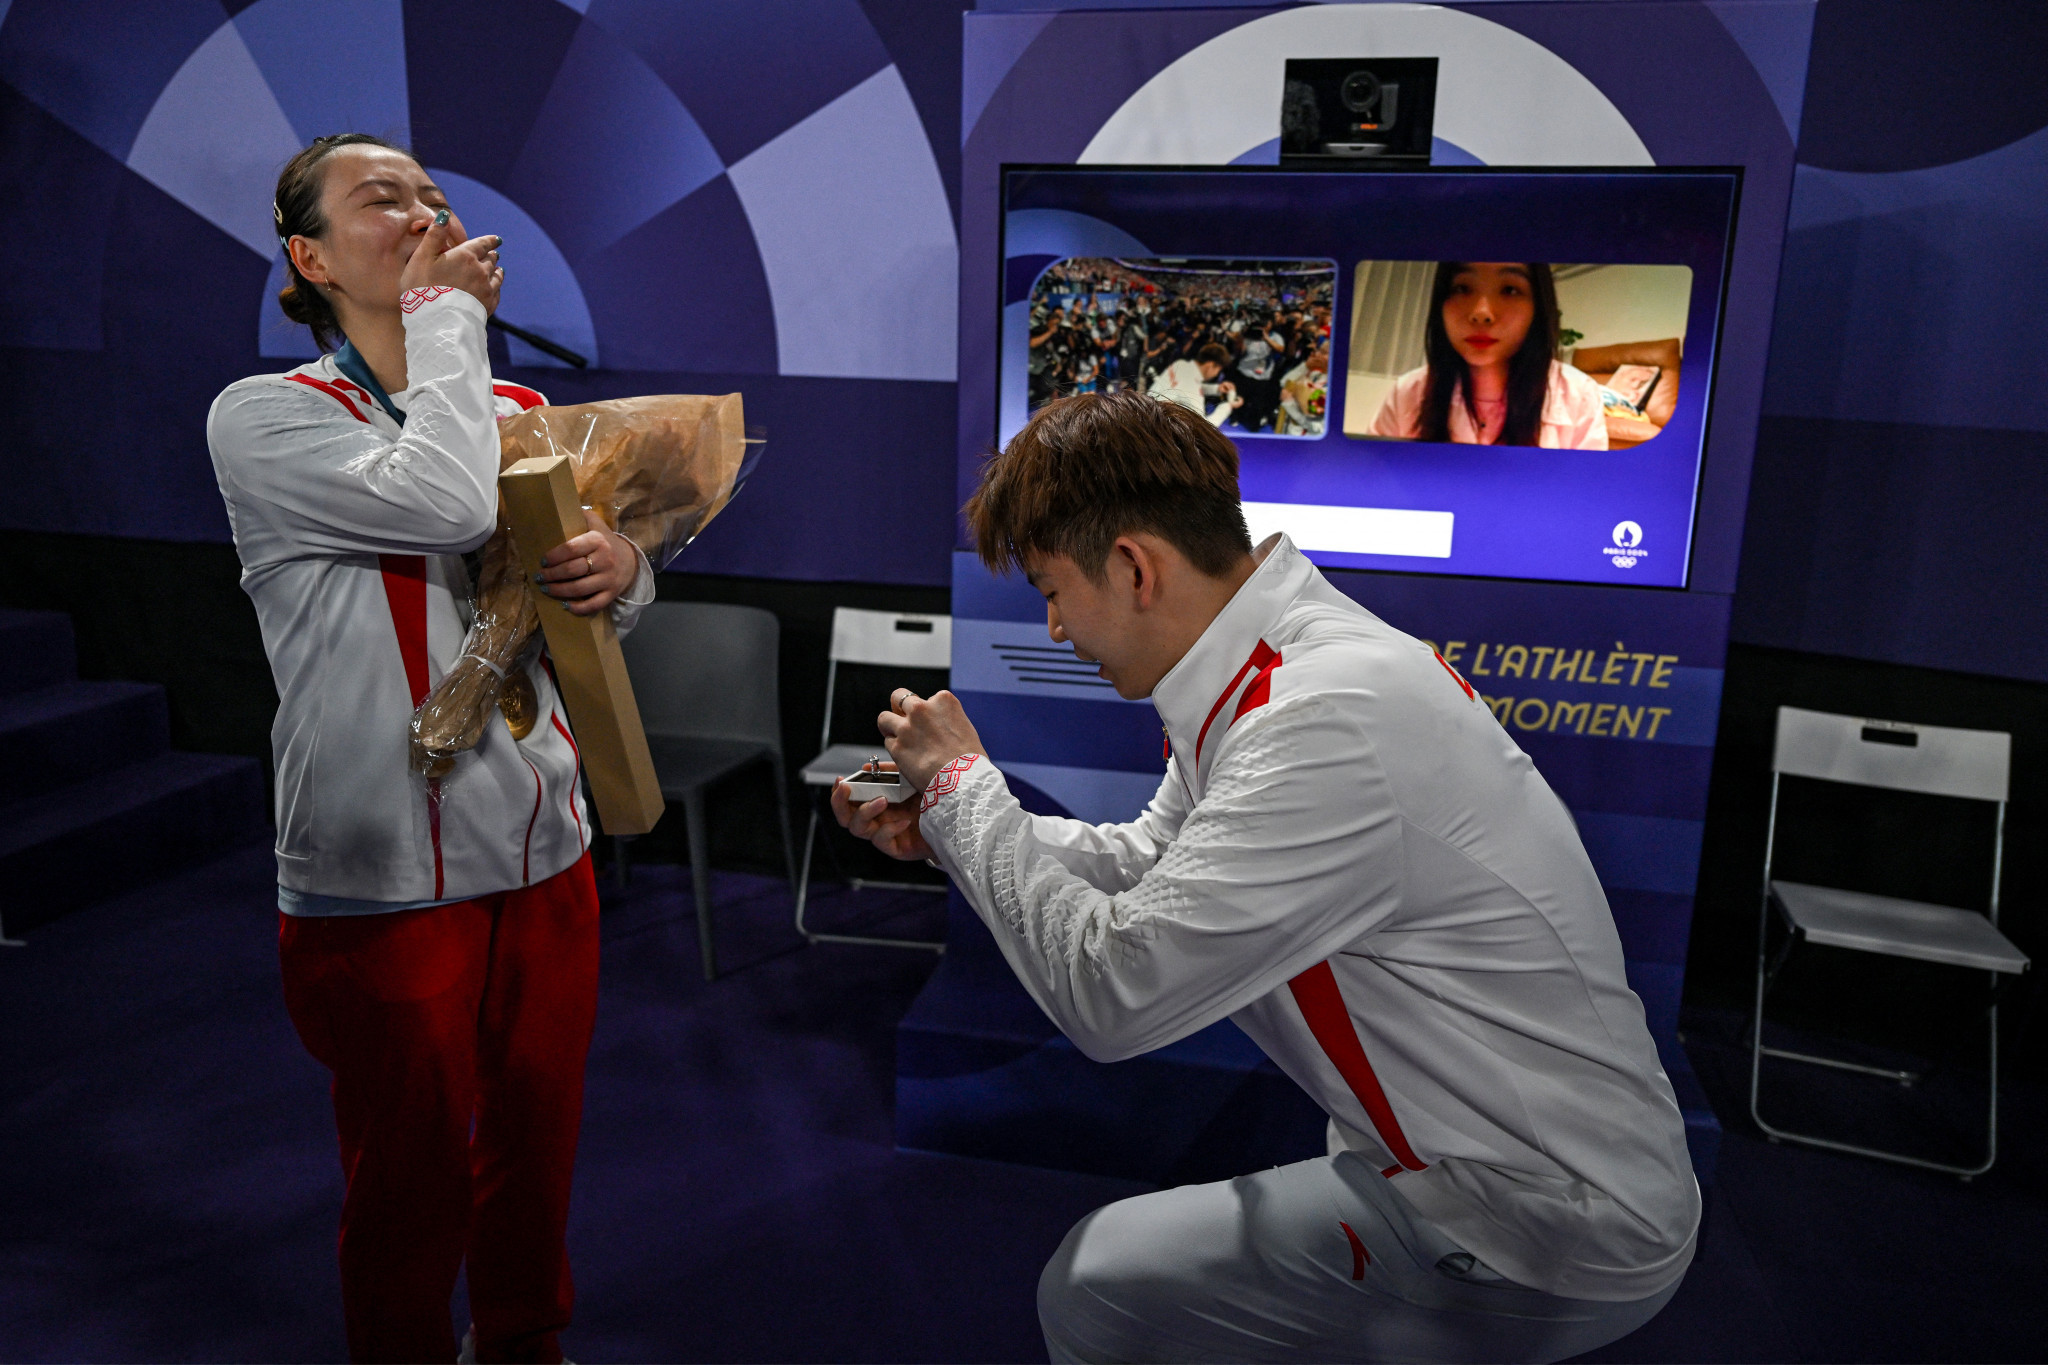 China's Liu Yuchen proposes to his partner and gold medallist Huang Ya Qiong at the Paris 2024 Olympic Games. GETTY IMAGES.